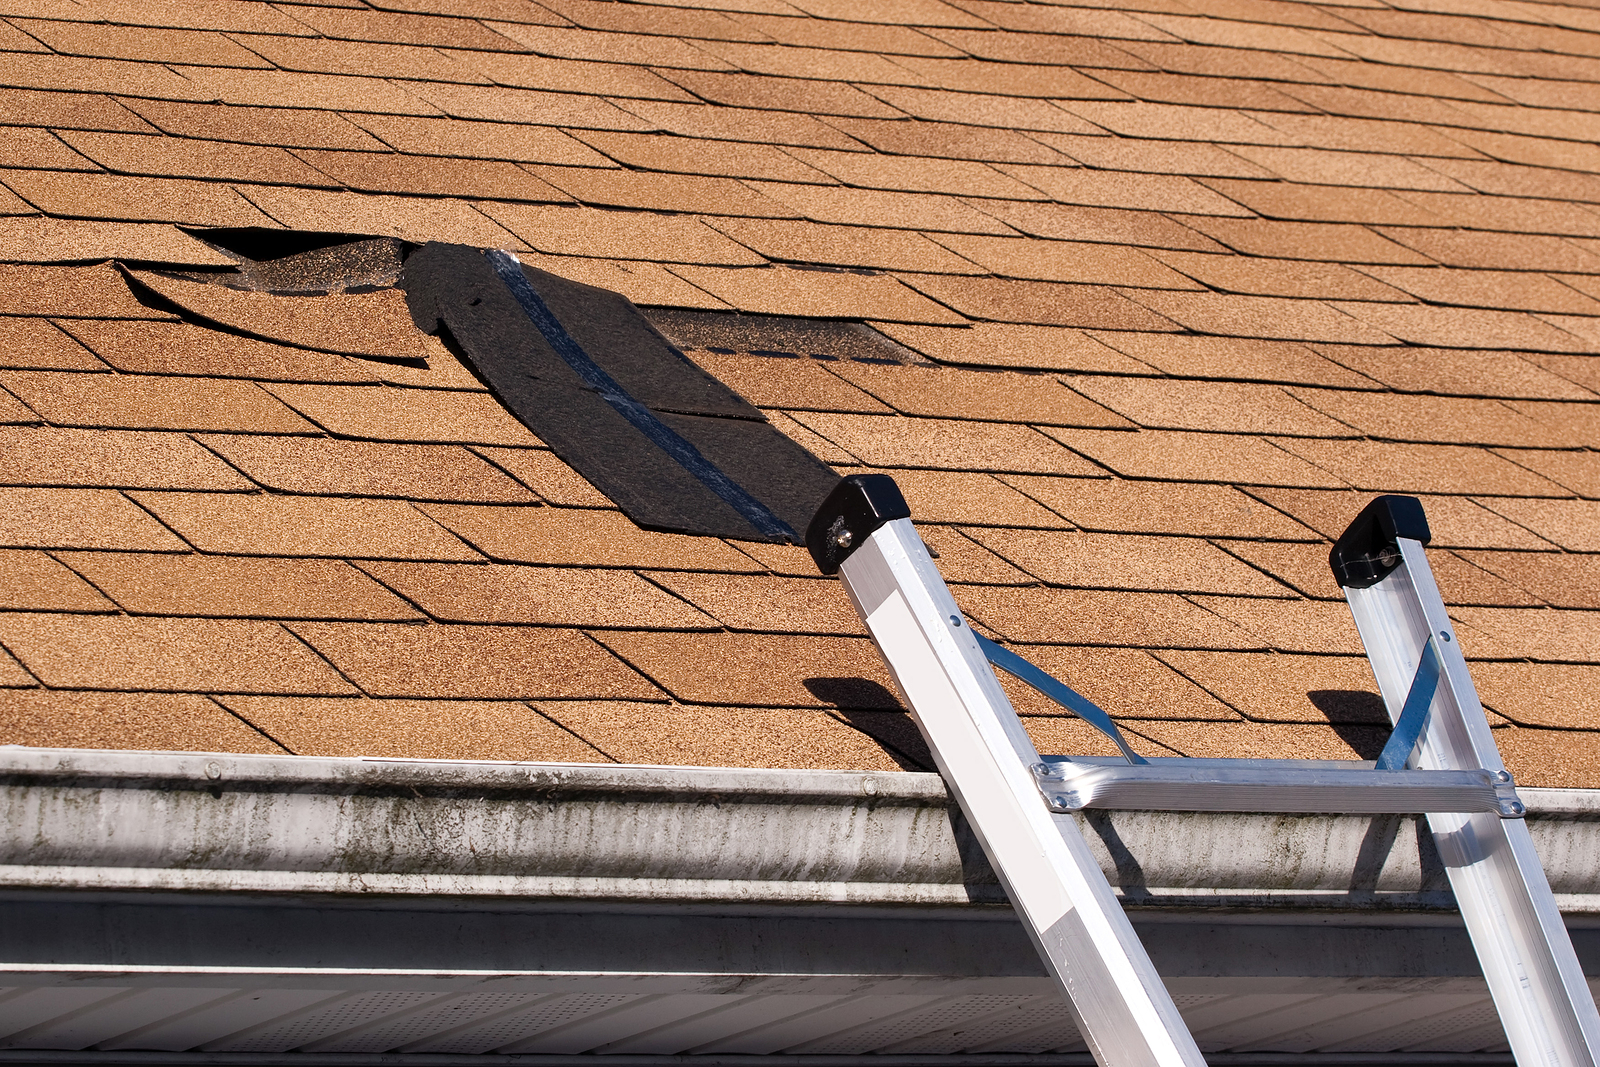 Using your tax refund to replace and/or repair your roof will not only add value but will protect the interior structure.